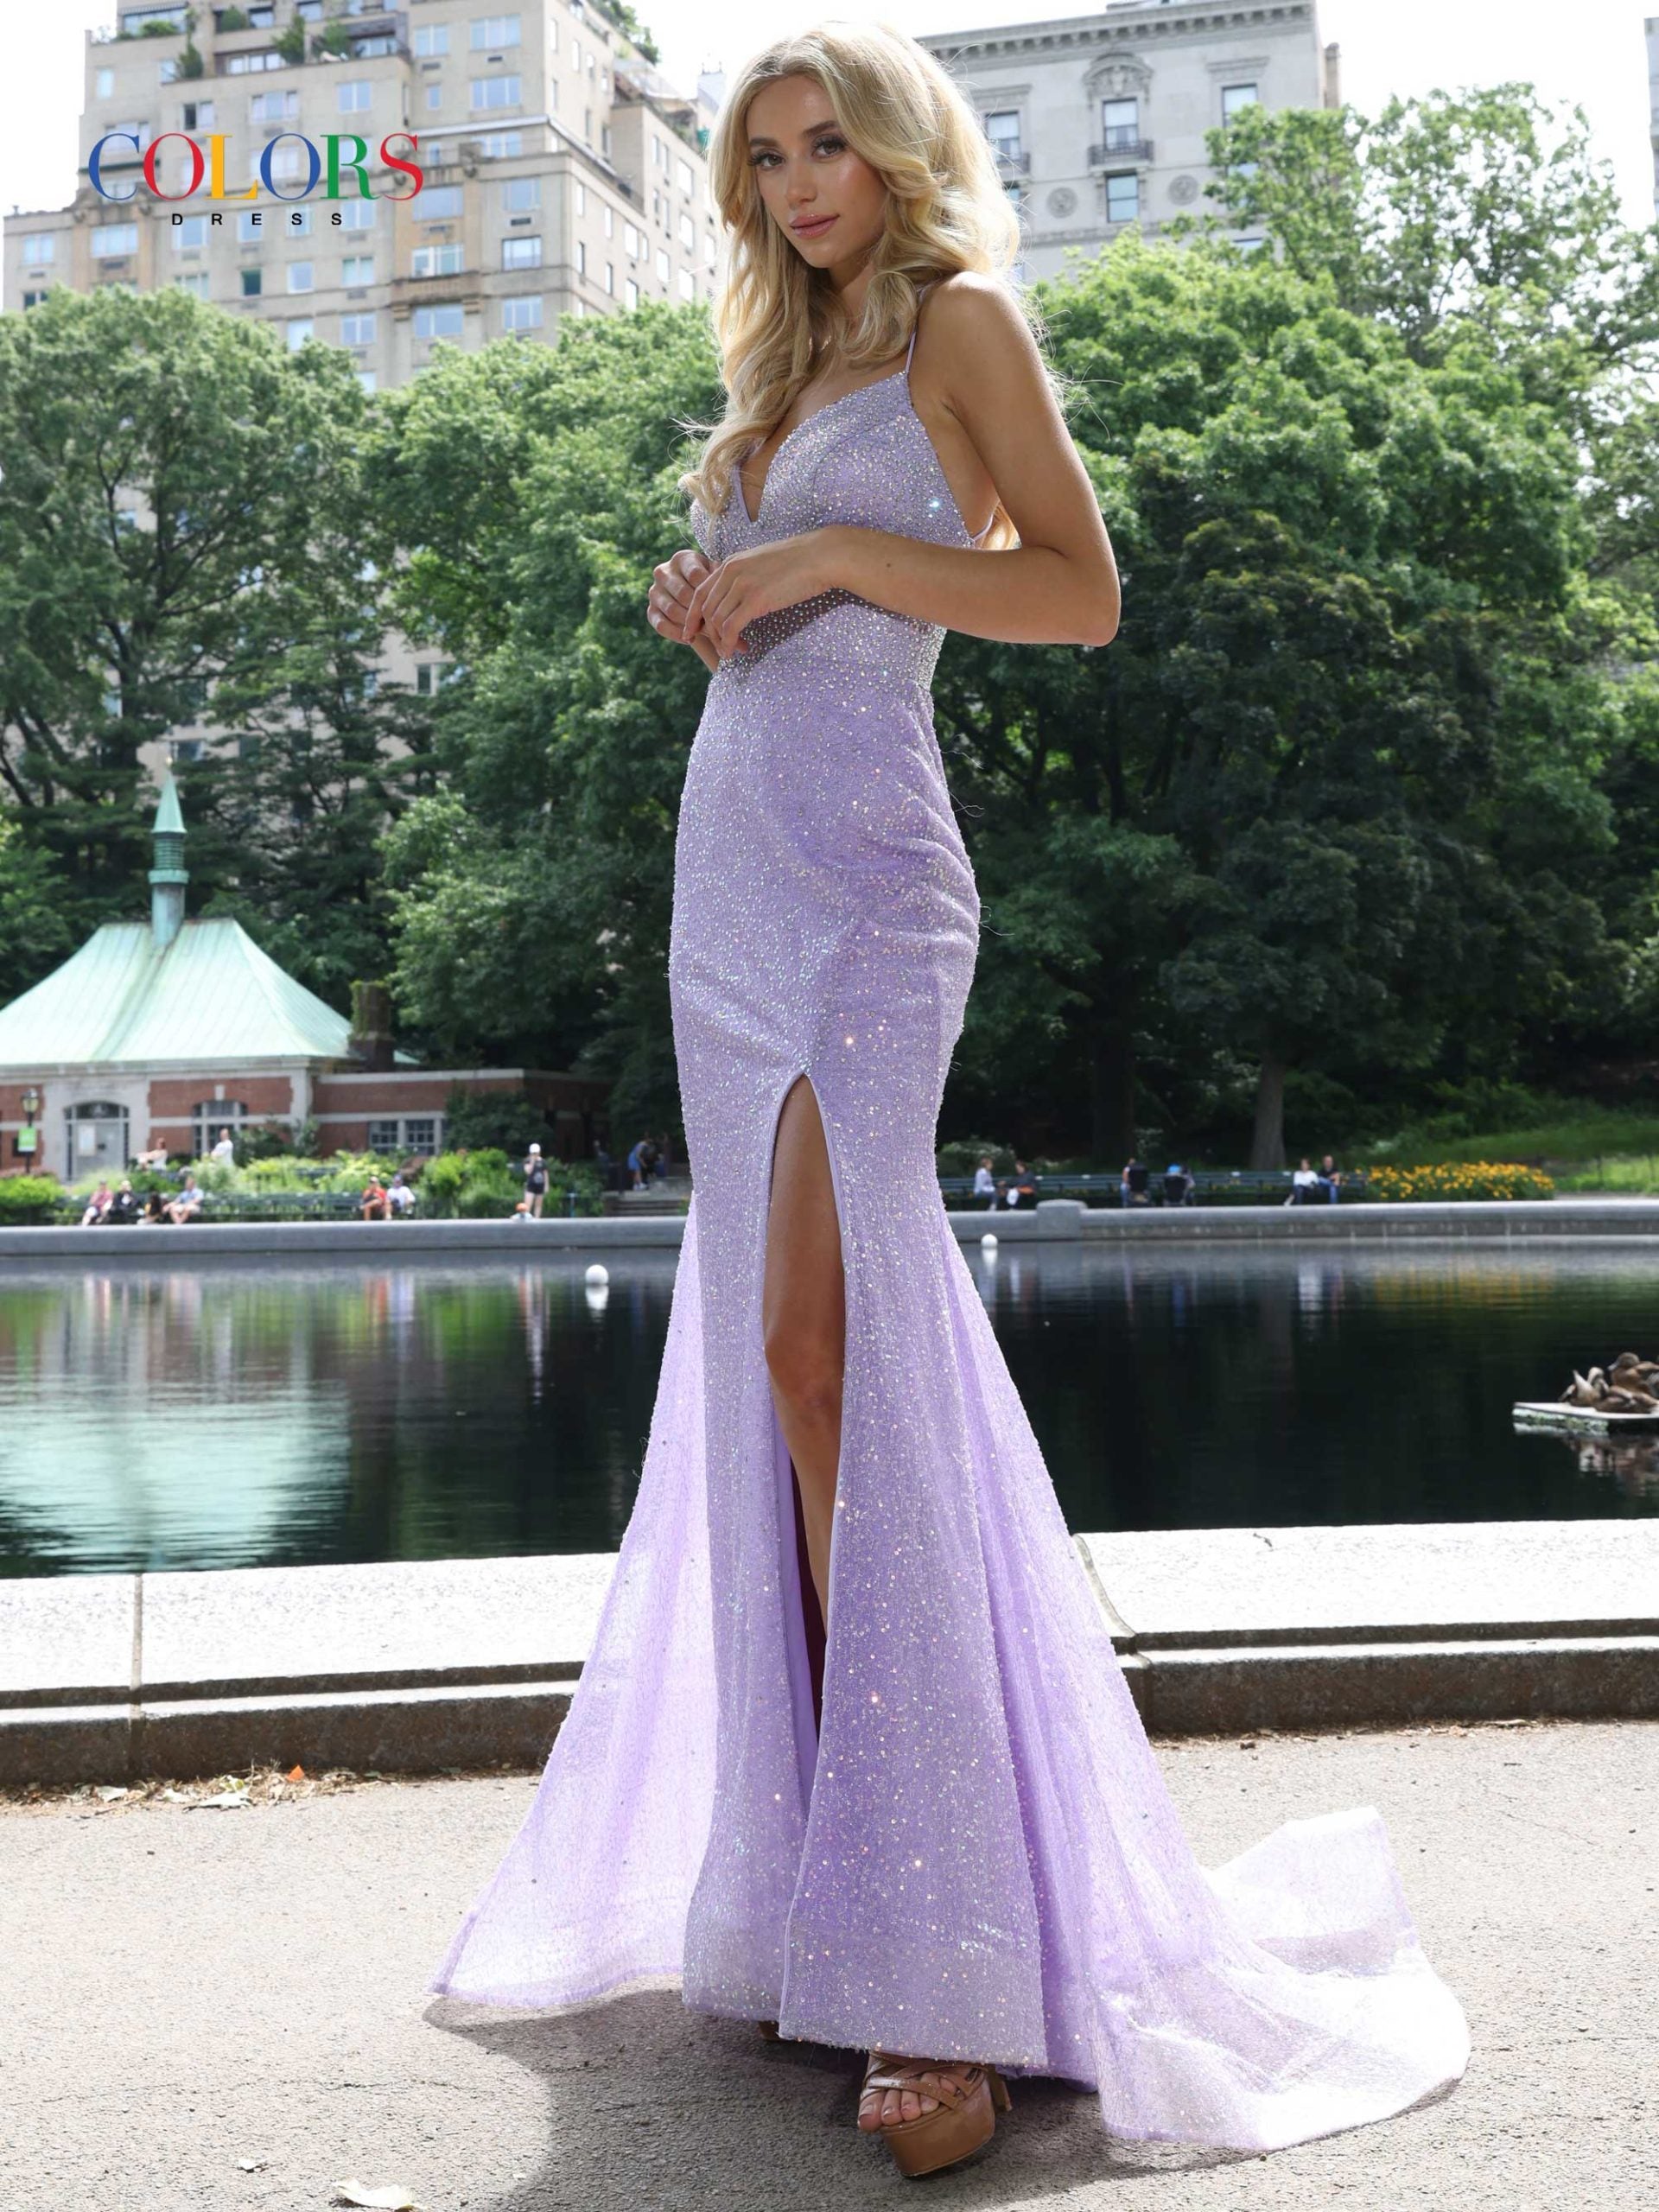 Colors Dress 2951 Lavender Prom, Pageant and Formal Evening Dress This is a sparkly glitter long evening prom dress with a v neckline and slit.